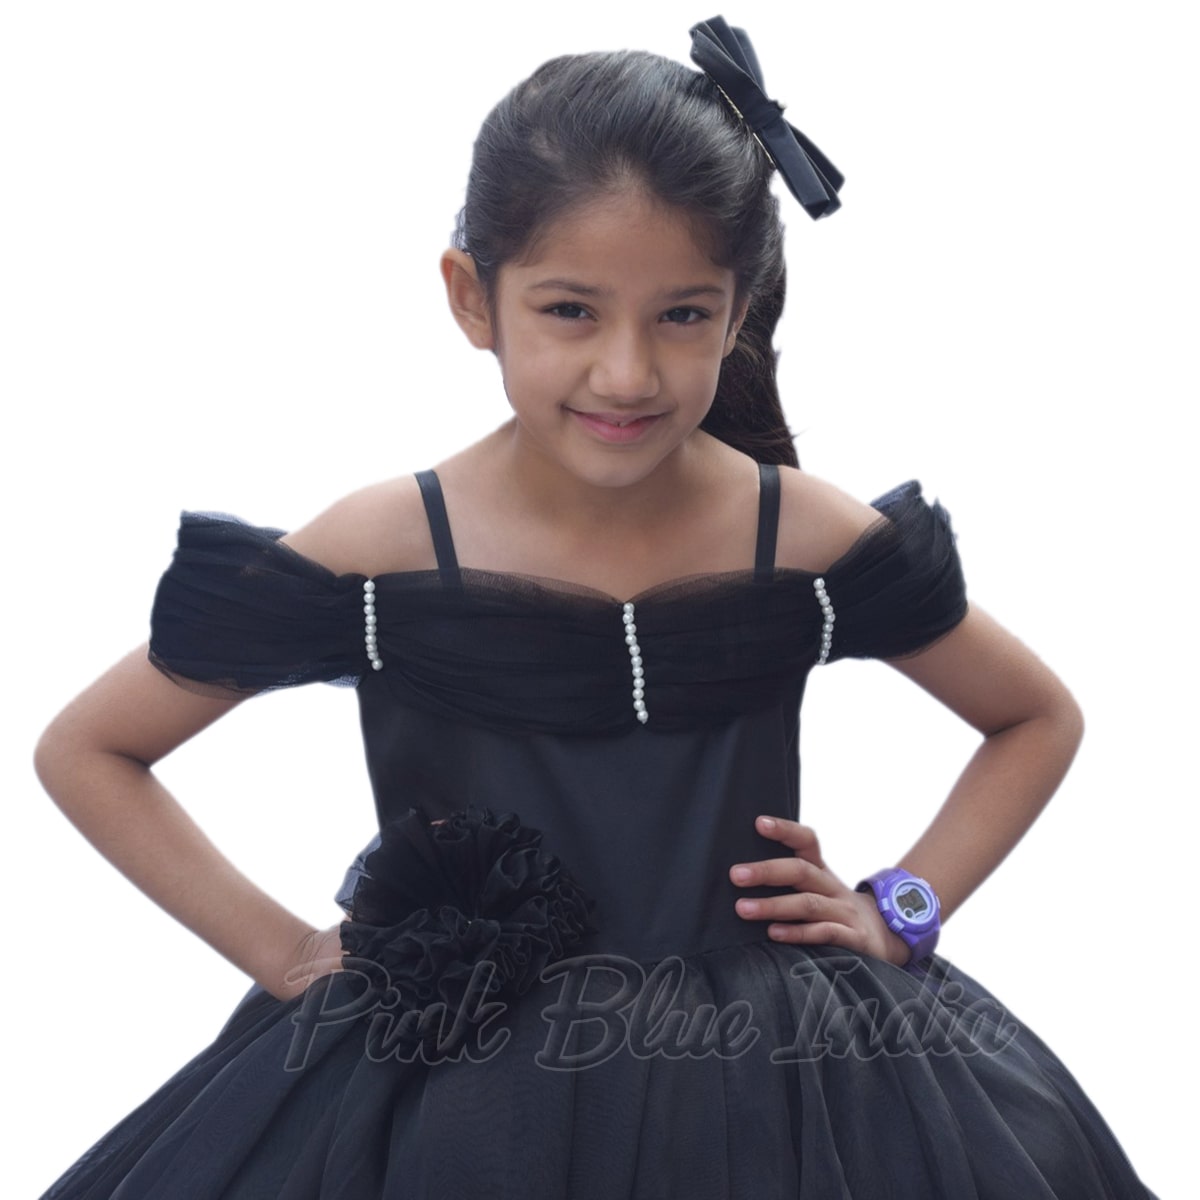 Buy Creative Kids Cotton Checked A-line Girl Dress - Black And White online